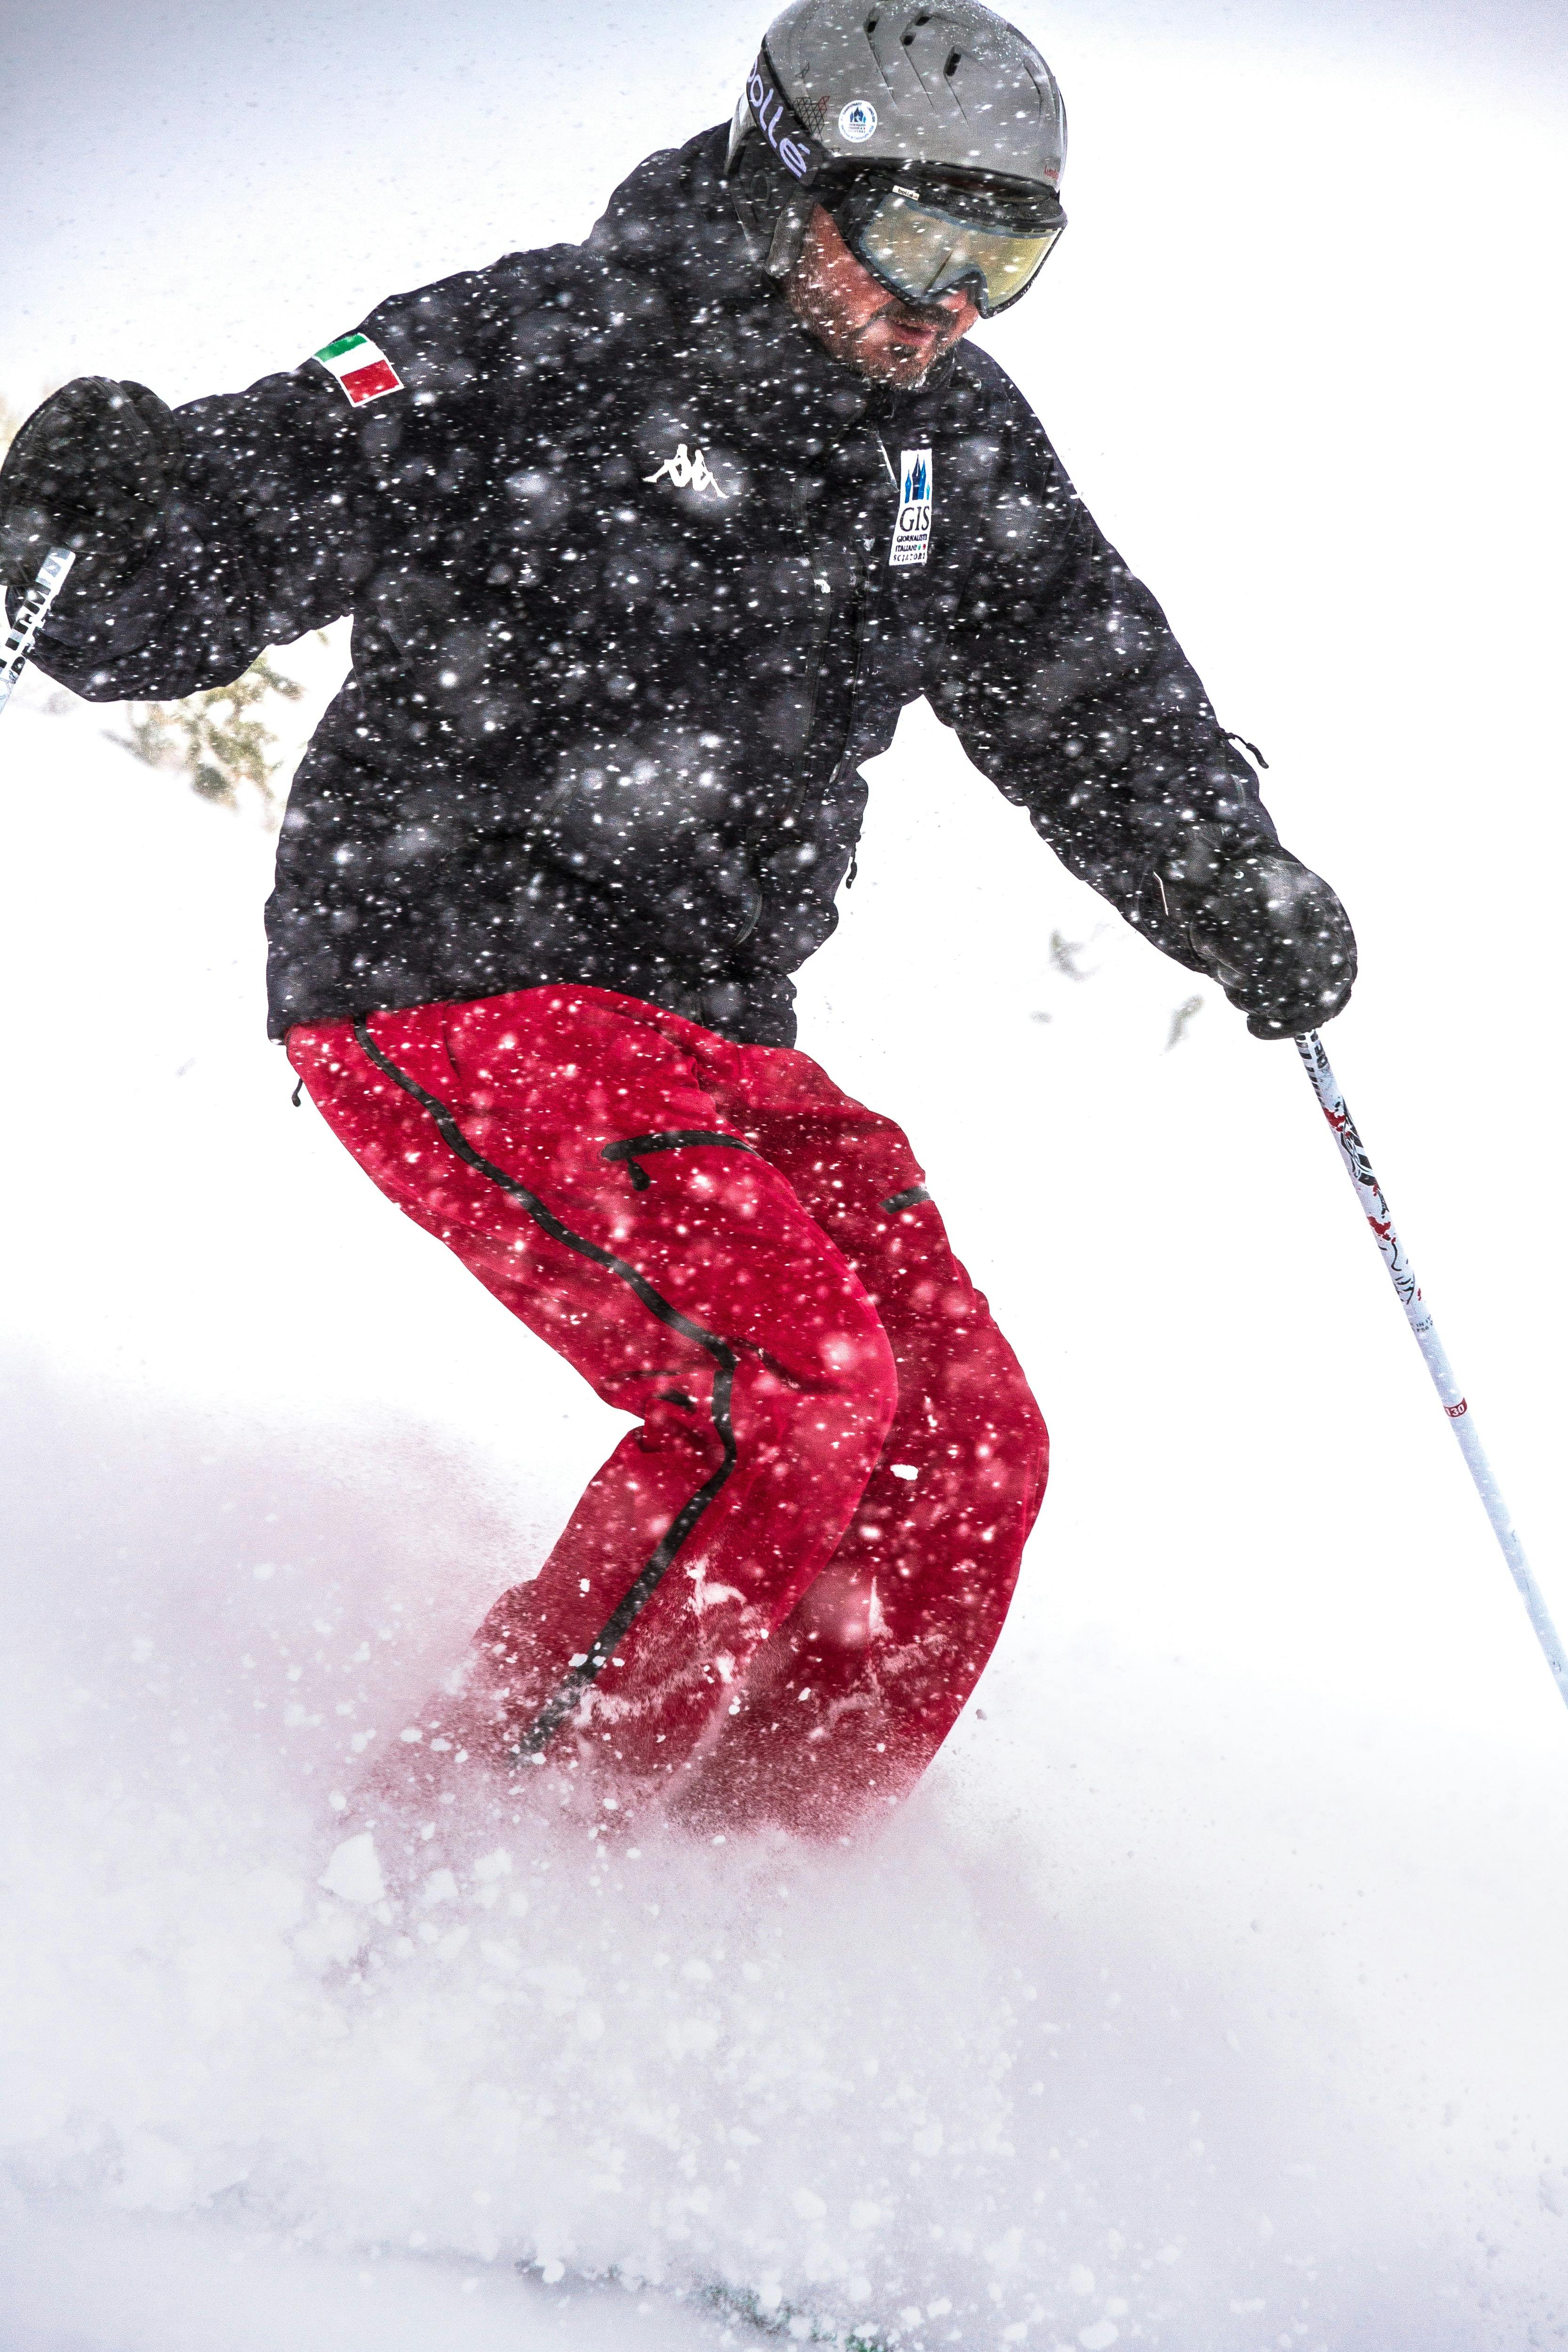 A close-up on a skier in a black jacket and red snow pants skiing down a slope, with knees deeply bent and kicking up lots of powder in the process.